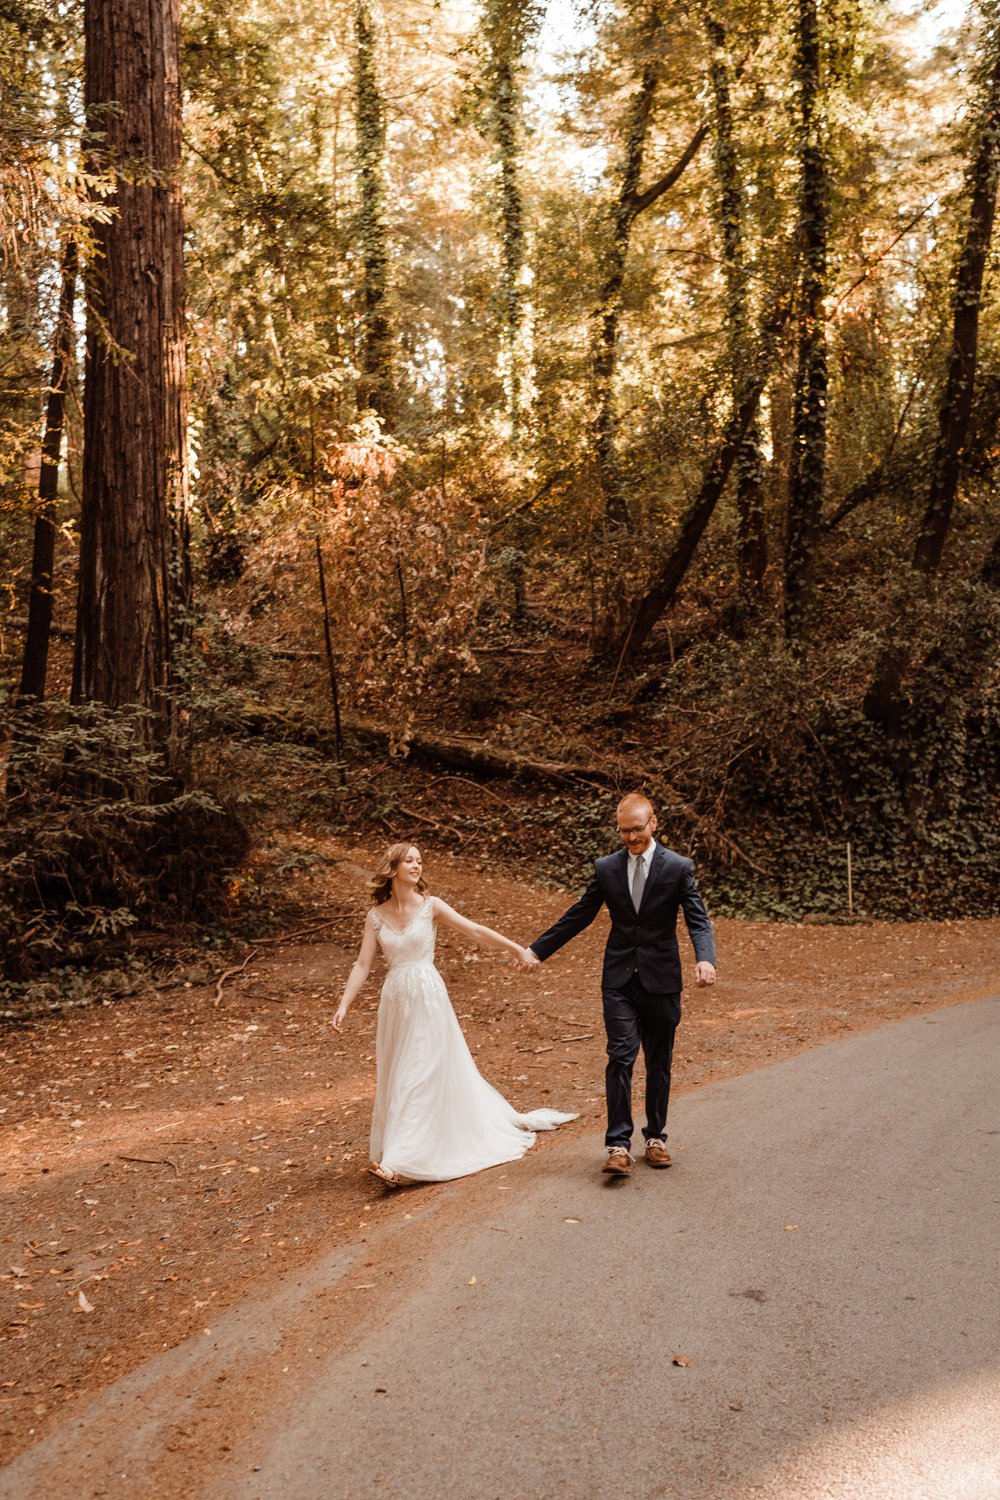 Wedding-in-the-Woods-Bride-and-Groom-Sunlit-Pictures-Beneath-Redwood-Forest (22).jpg